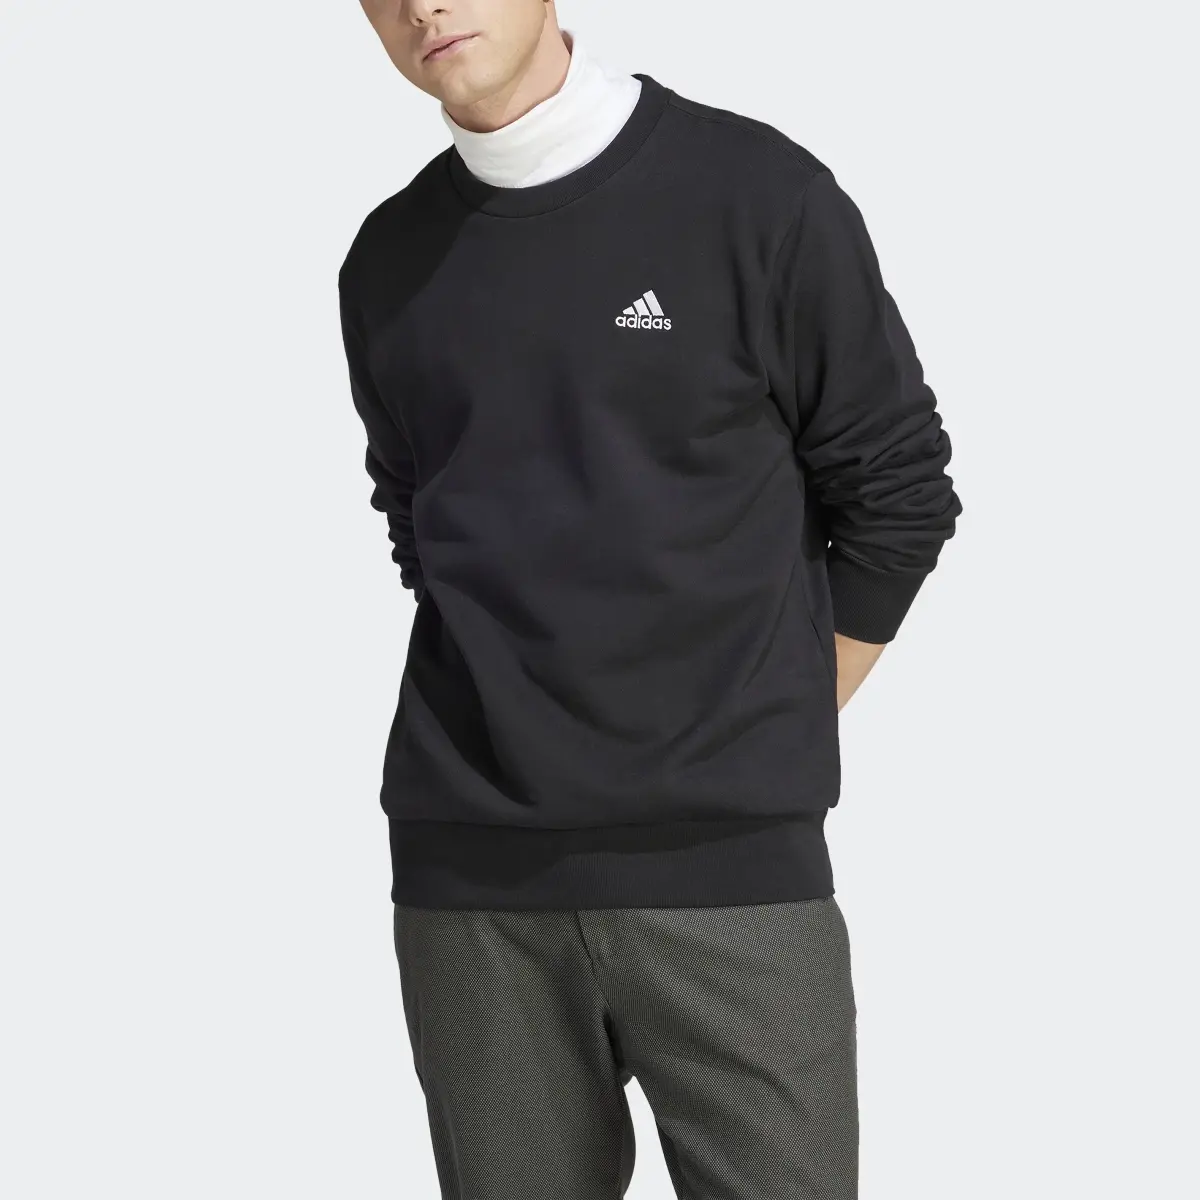 Adidas Essentials French Terry Embroidered Small Logo Sweatshirt. 1